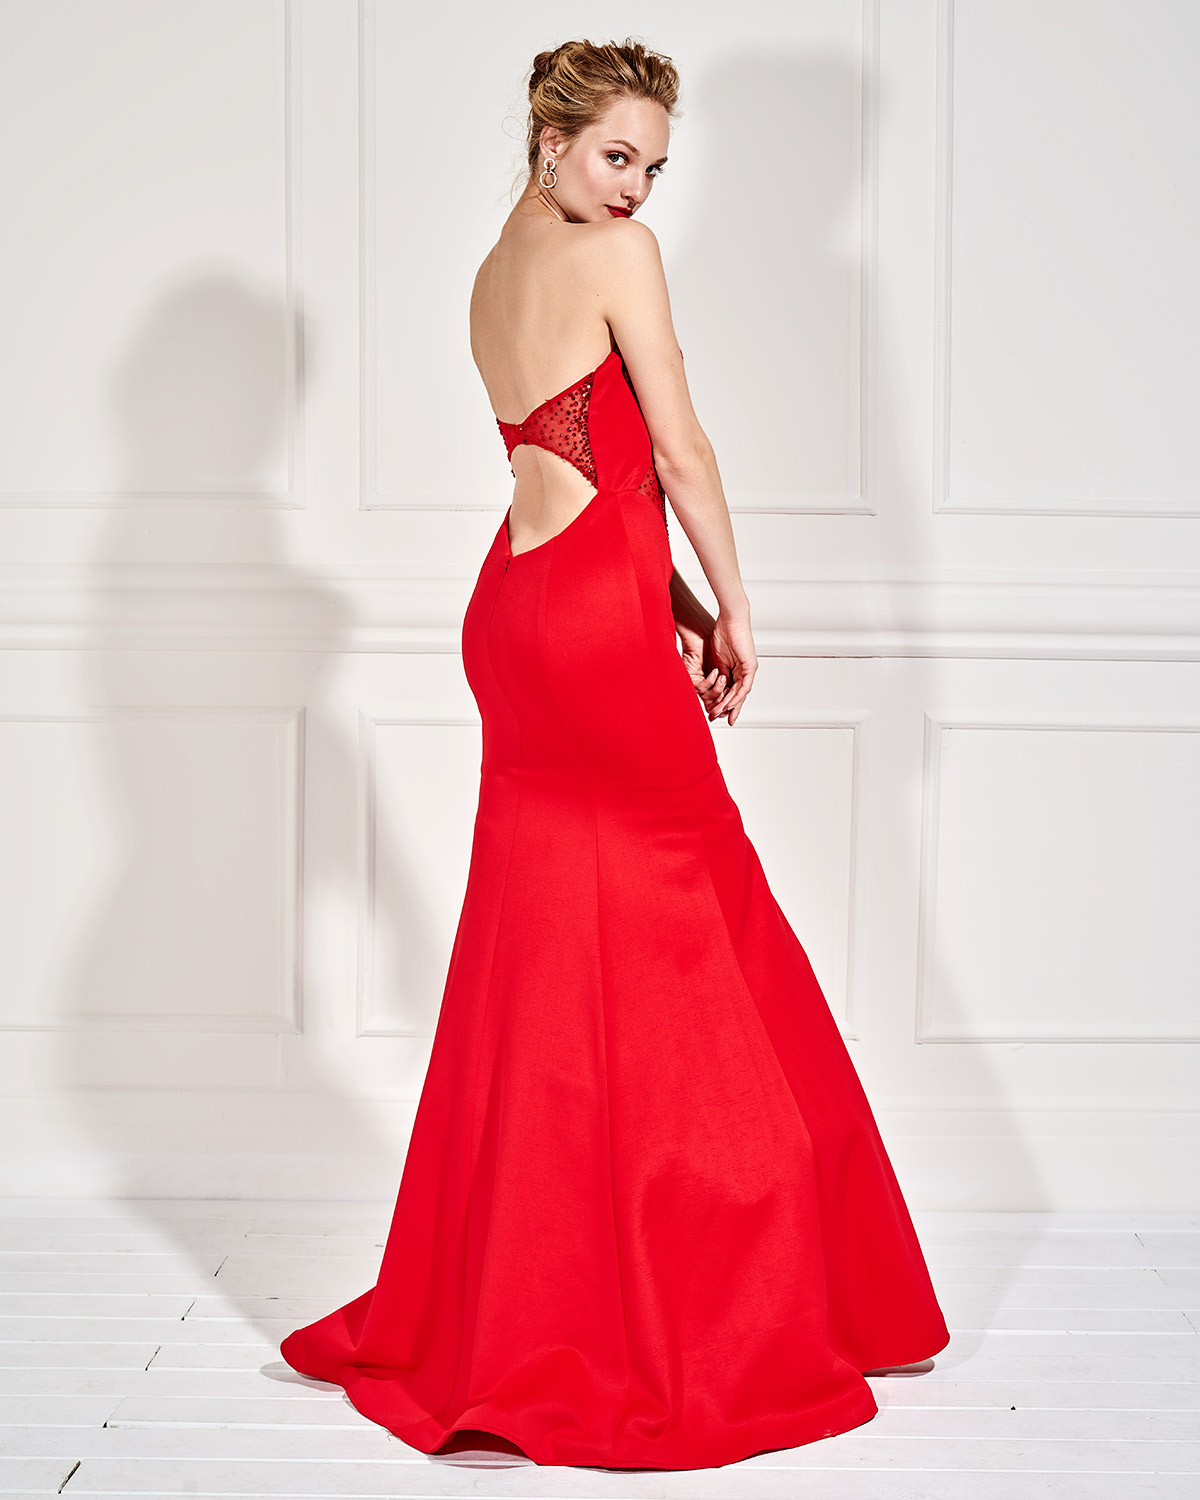 Long strapless evening dress with open back and beading